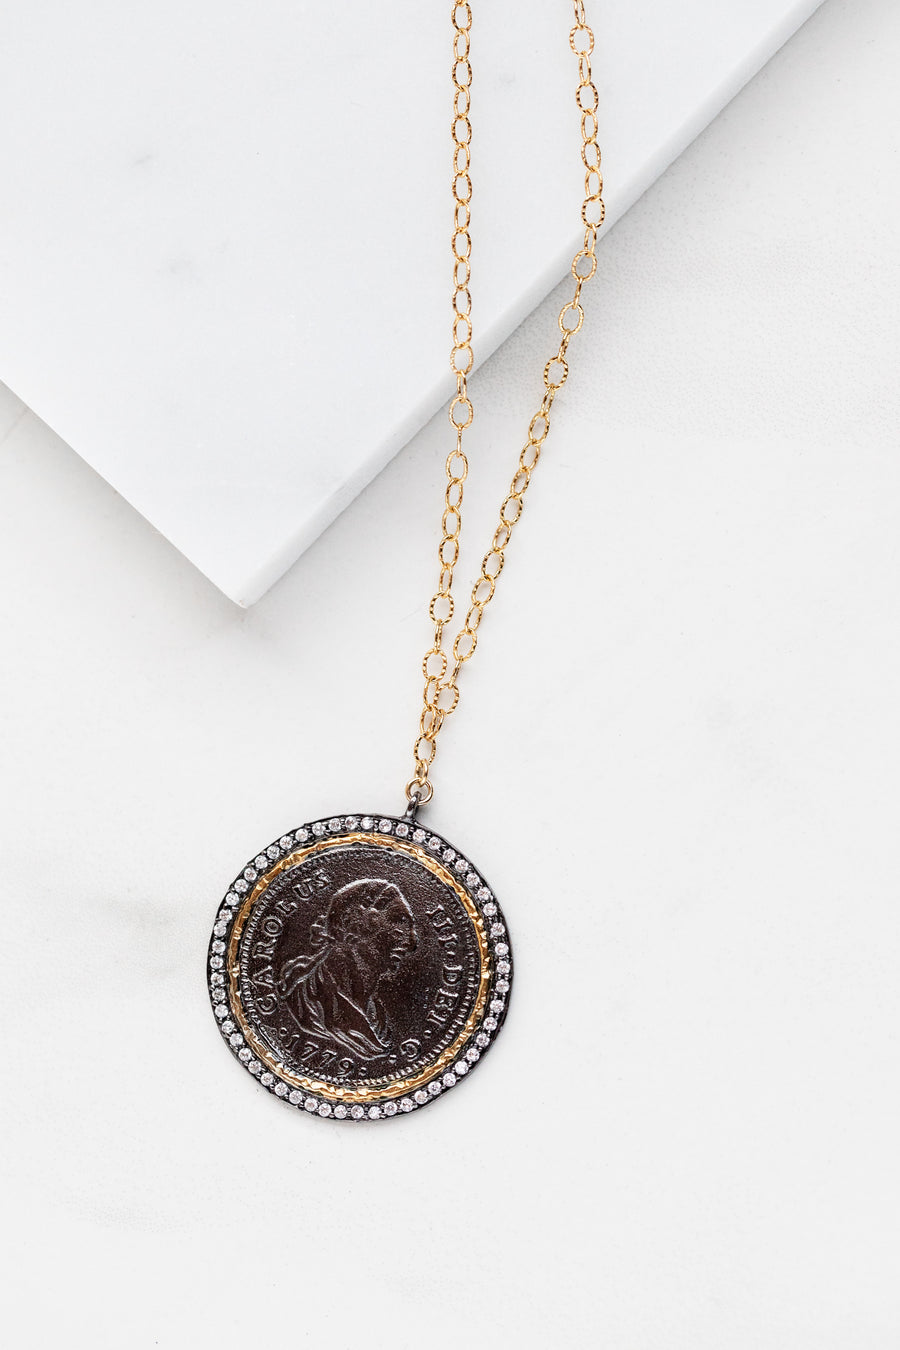 Find the perfect necklace you're looking for from Charme Silkiner! This beautiful 14K Gold Filled Chain Necklace with black stamped coin pendant and CZ pave accents is perfection. Great for layering or wearing alone the Easton Necklace is the perfect piece of unique jewelry that everyone should own.